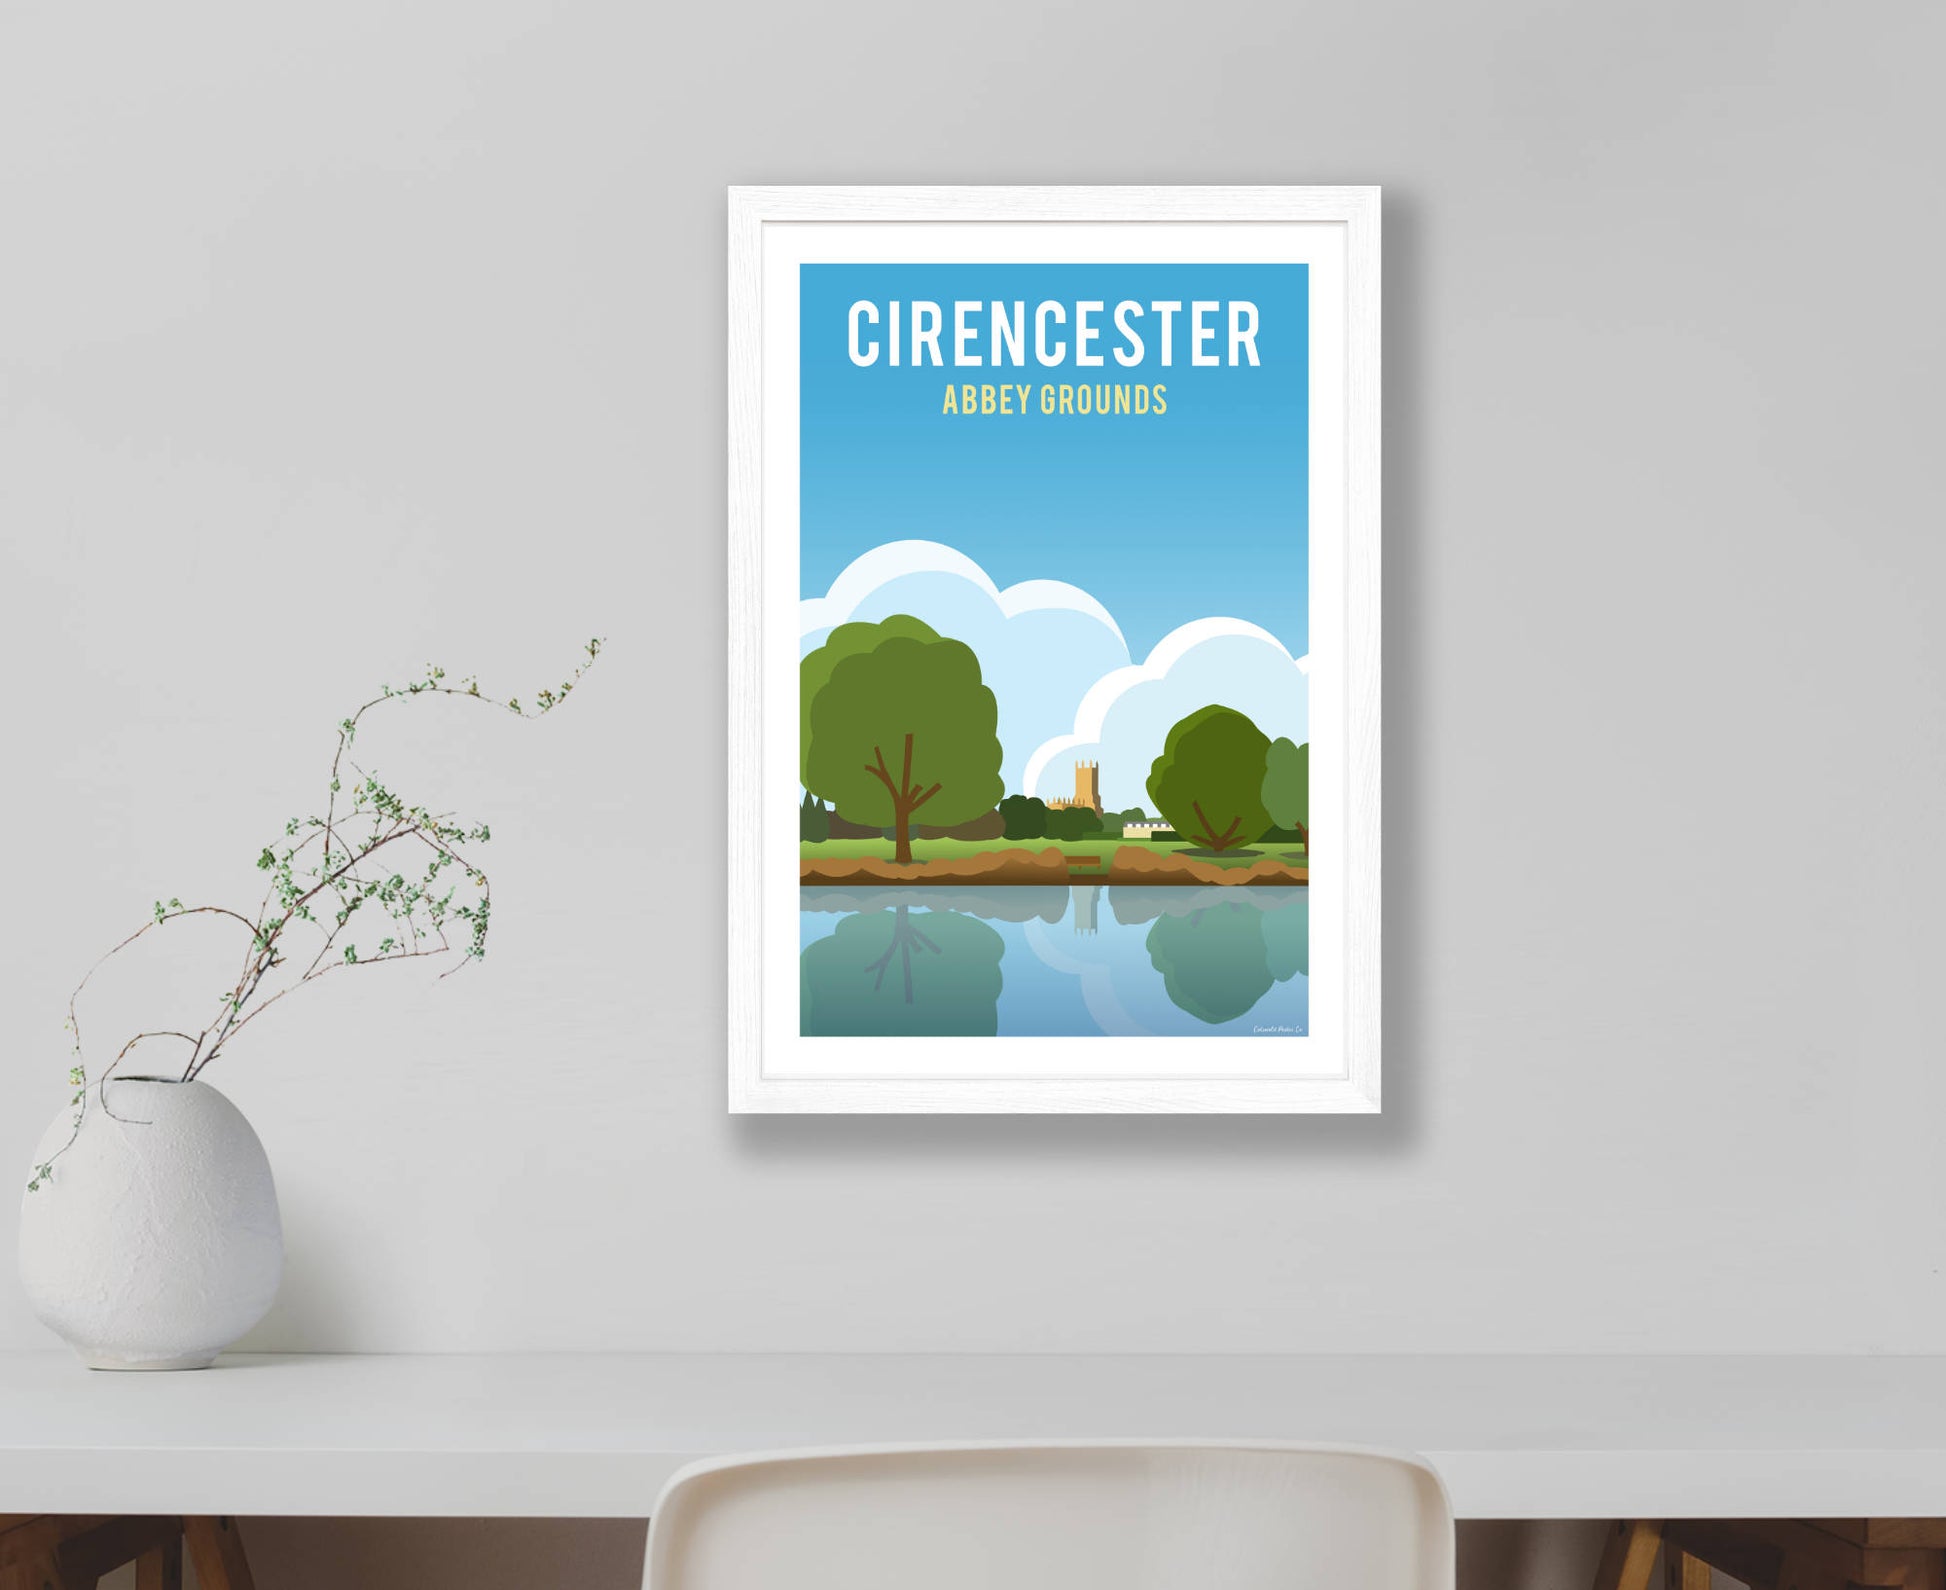 Cirencester Abbey Grounds Poster in white frame